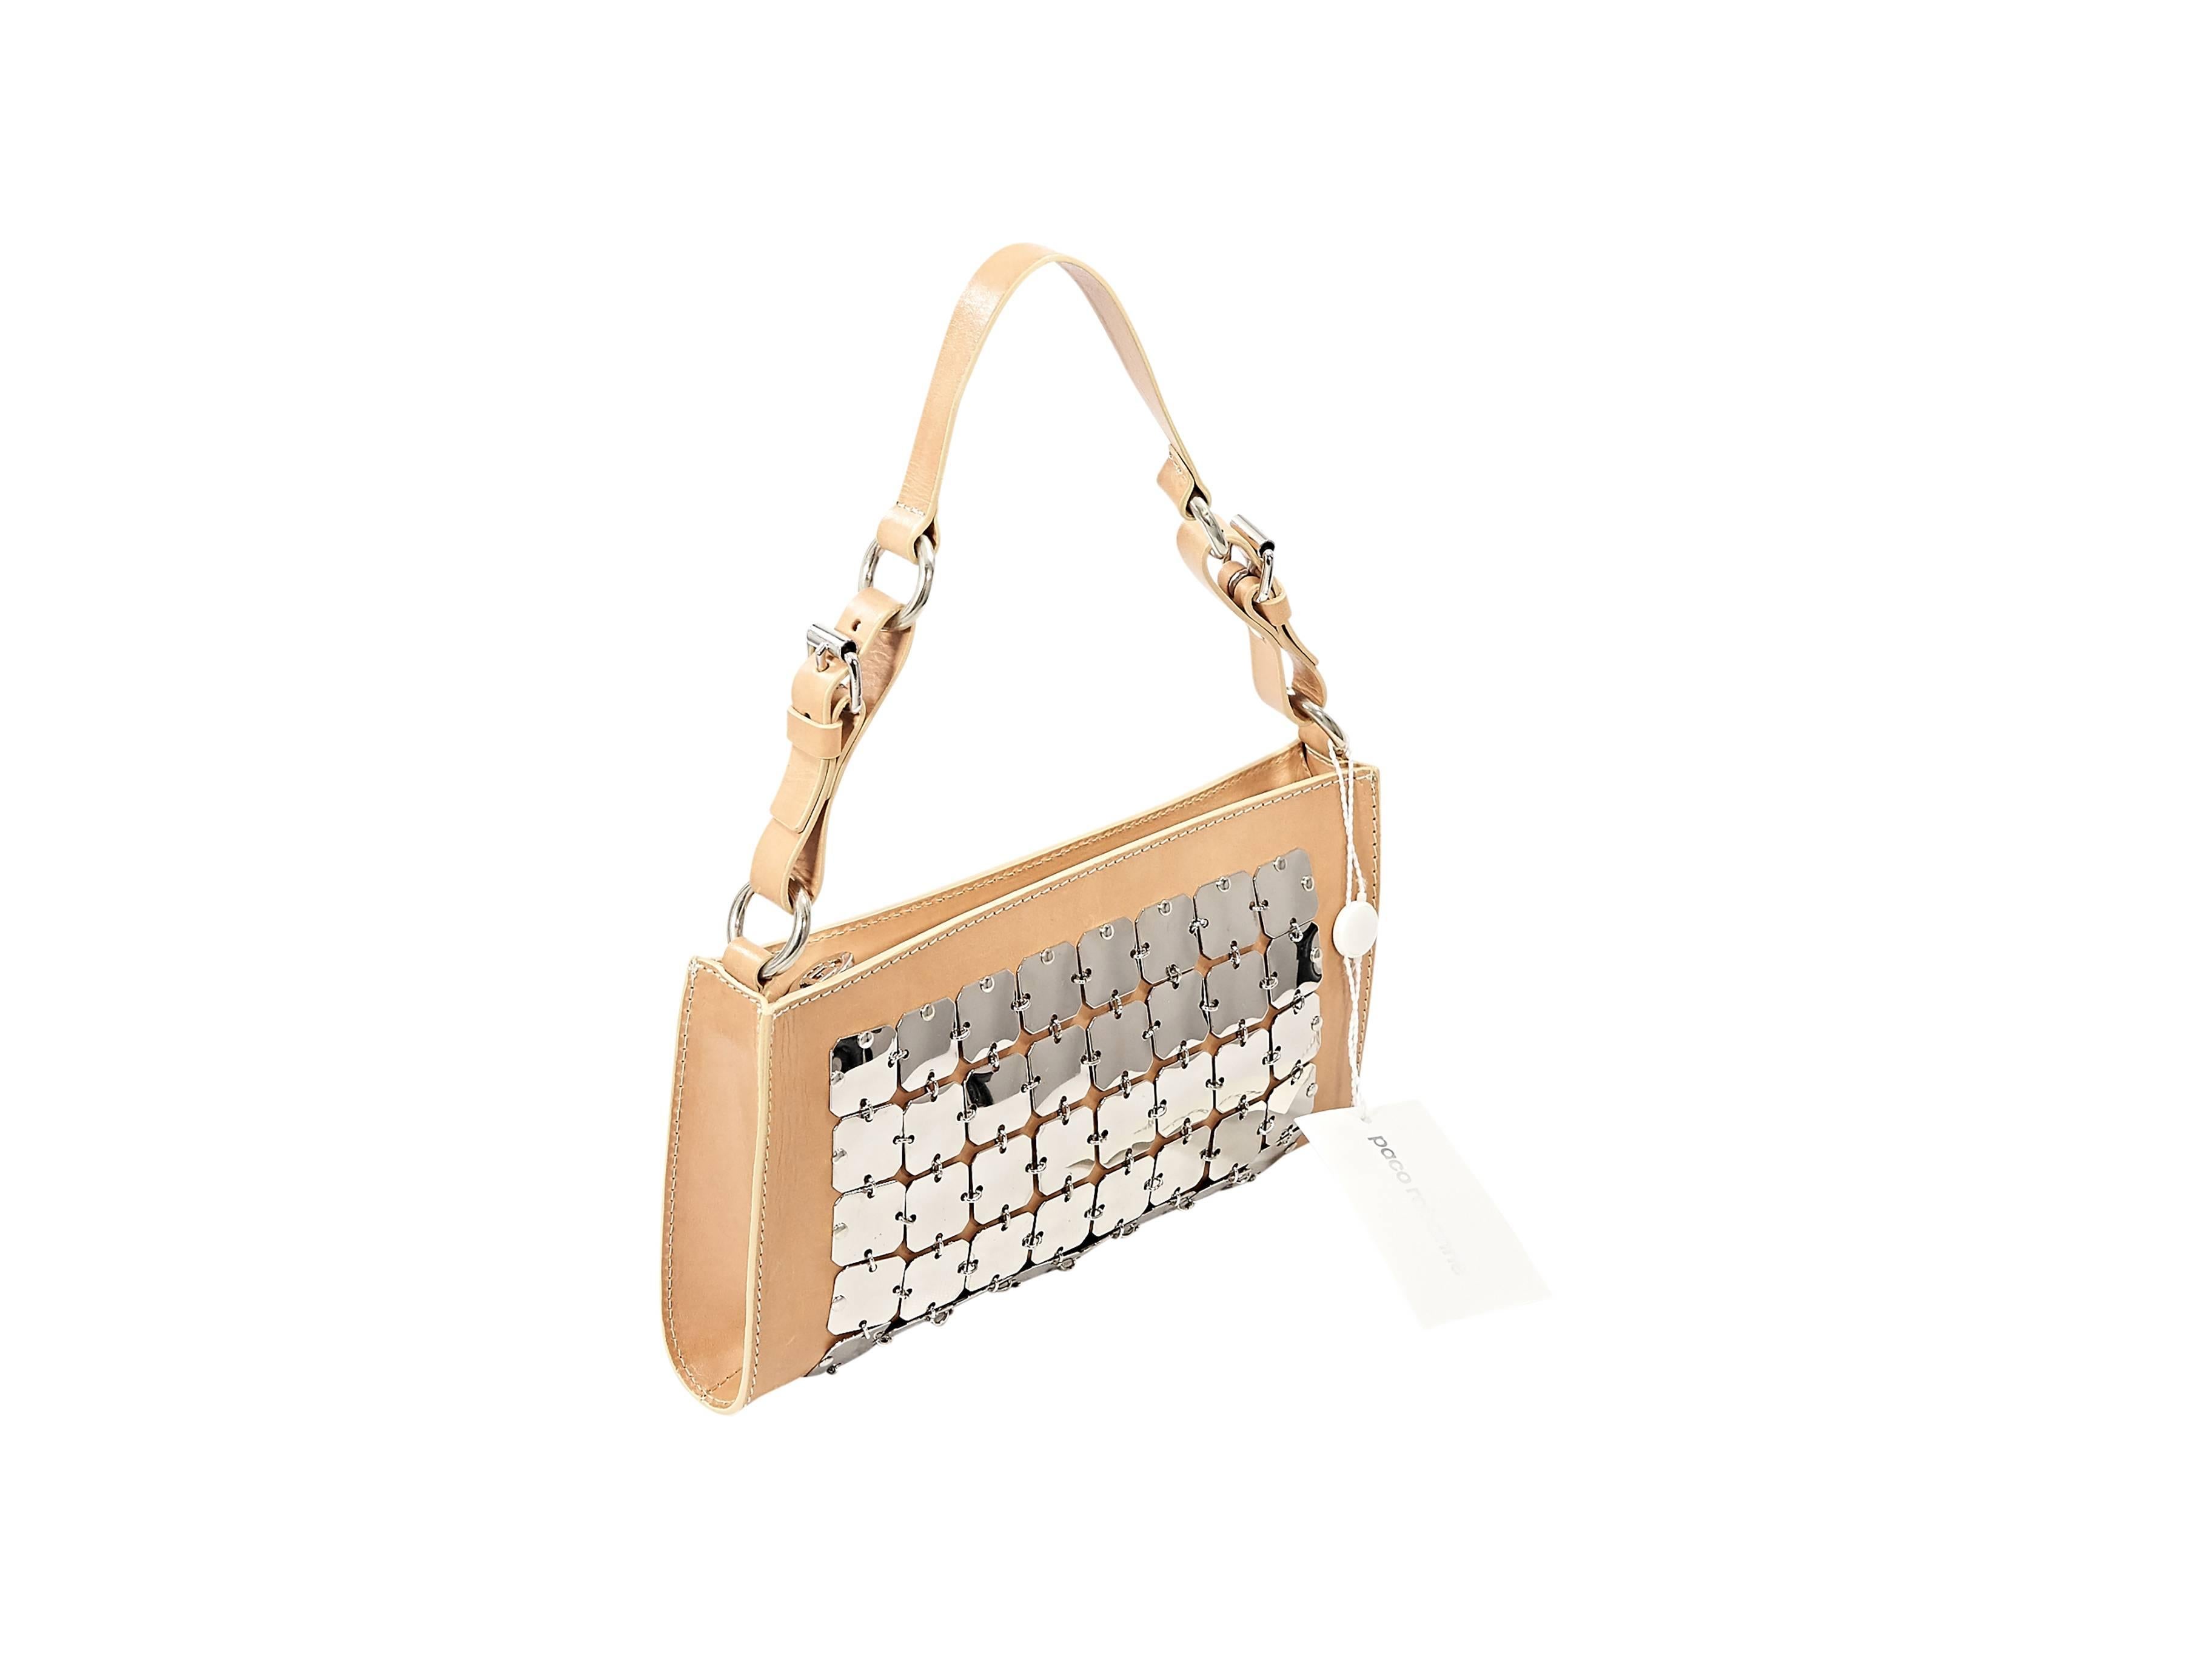 Product details:  Tan leather shoulder bag by Paco Rabanne.  Embellished with hardware accents.  Shoulder strap.  Top zip closure.  Silvertone hardware.  9.75